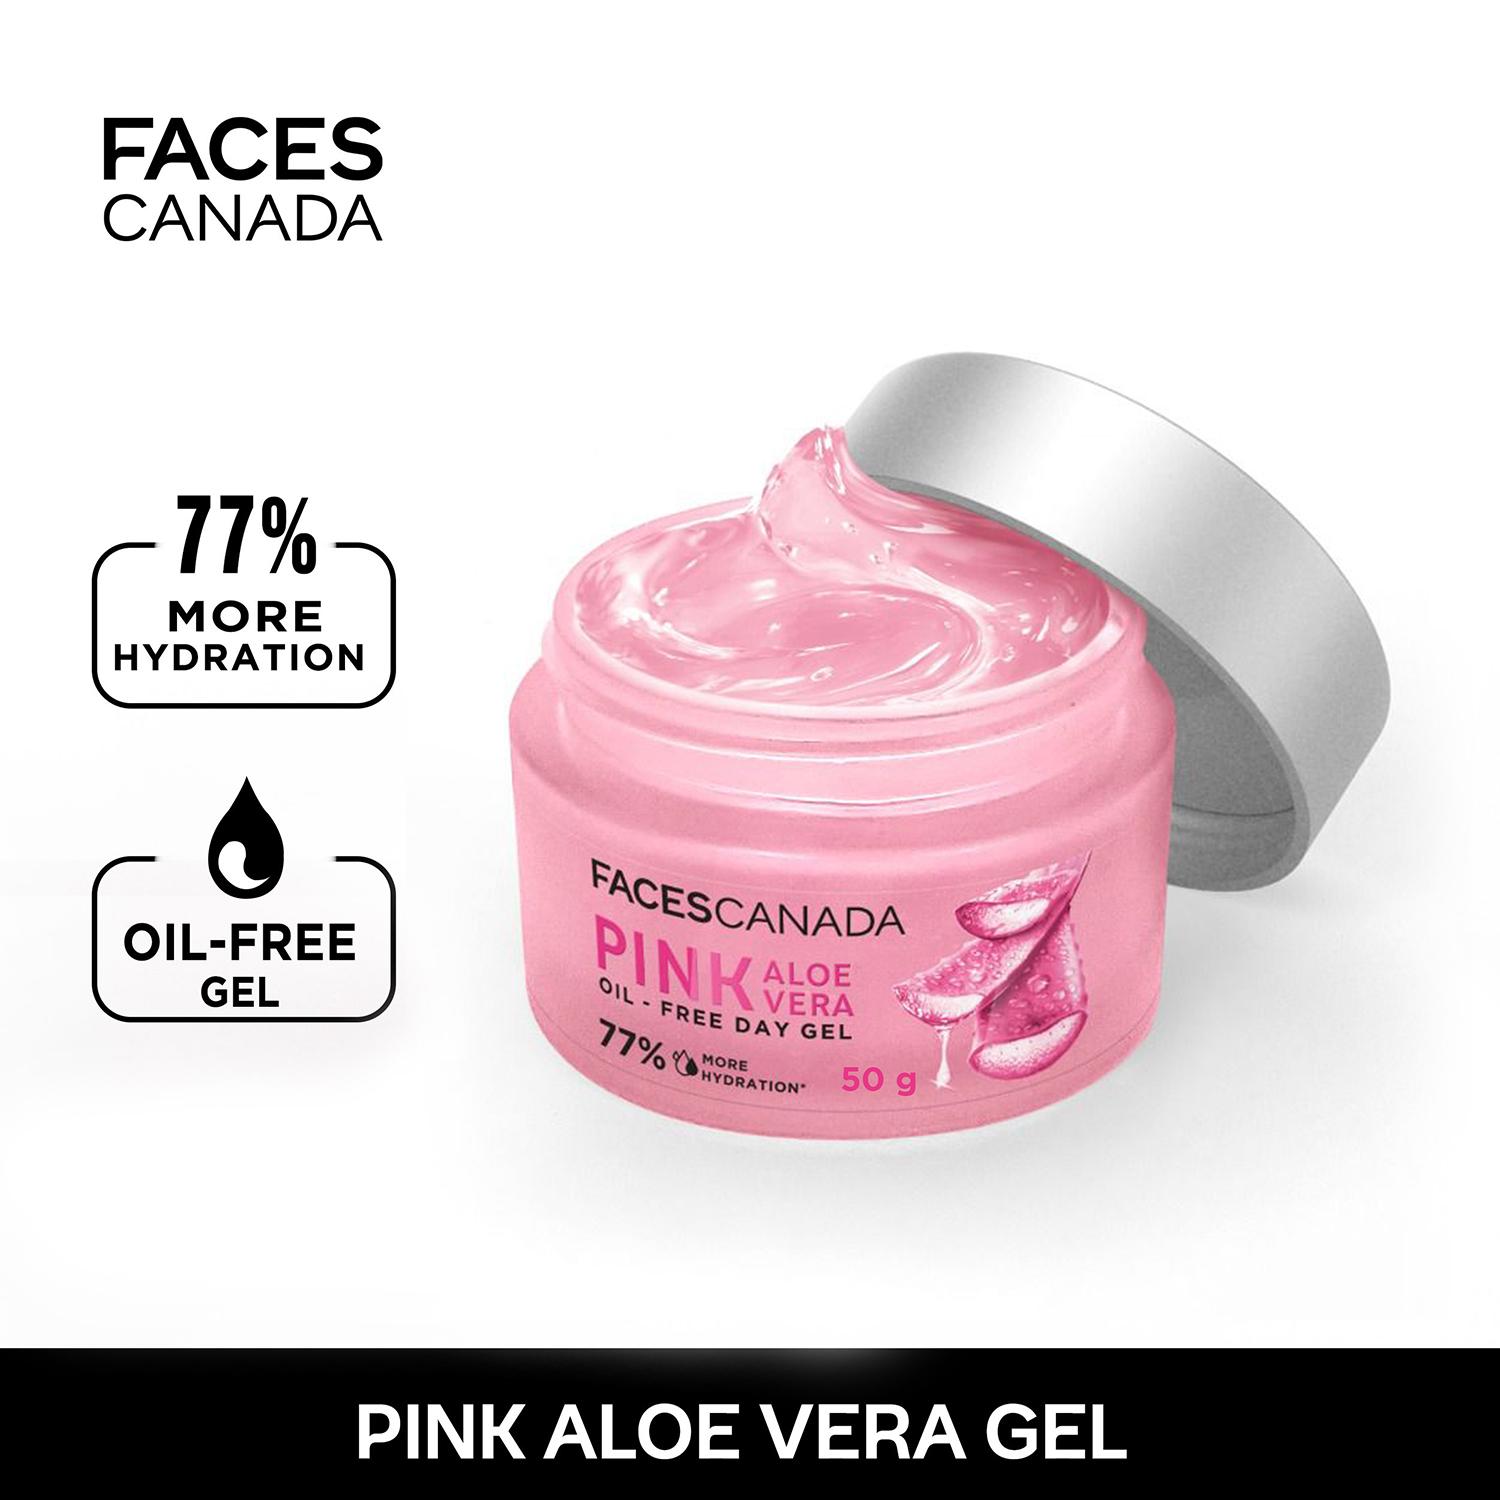 Faces Canada | Faces Canada Pink Aloe Vera Oil-Free Day Gel, 1.5% Hyaluronic Acid, Intense Hydration (50 g)